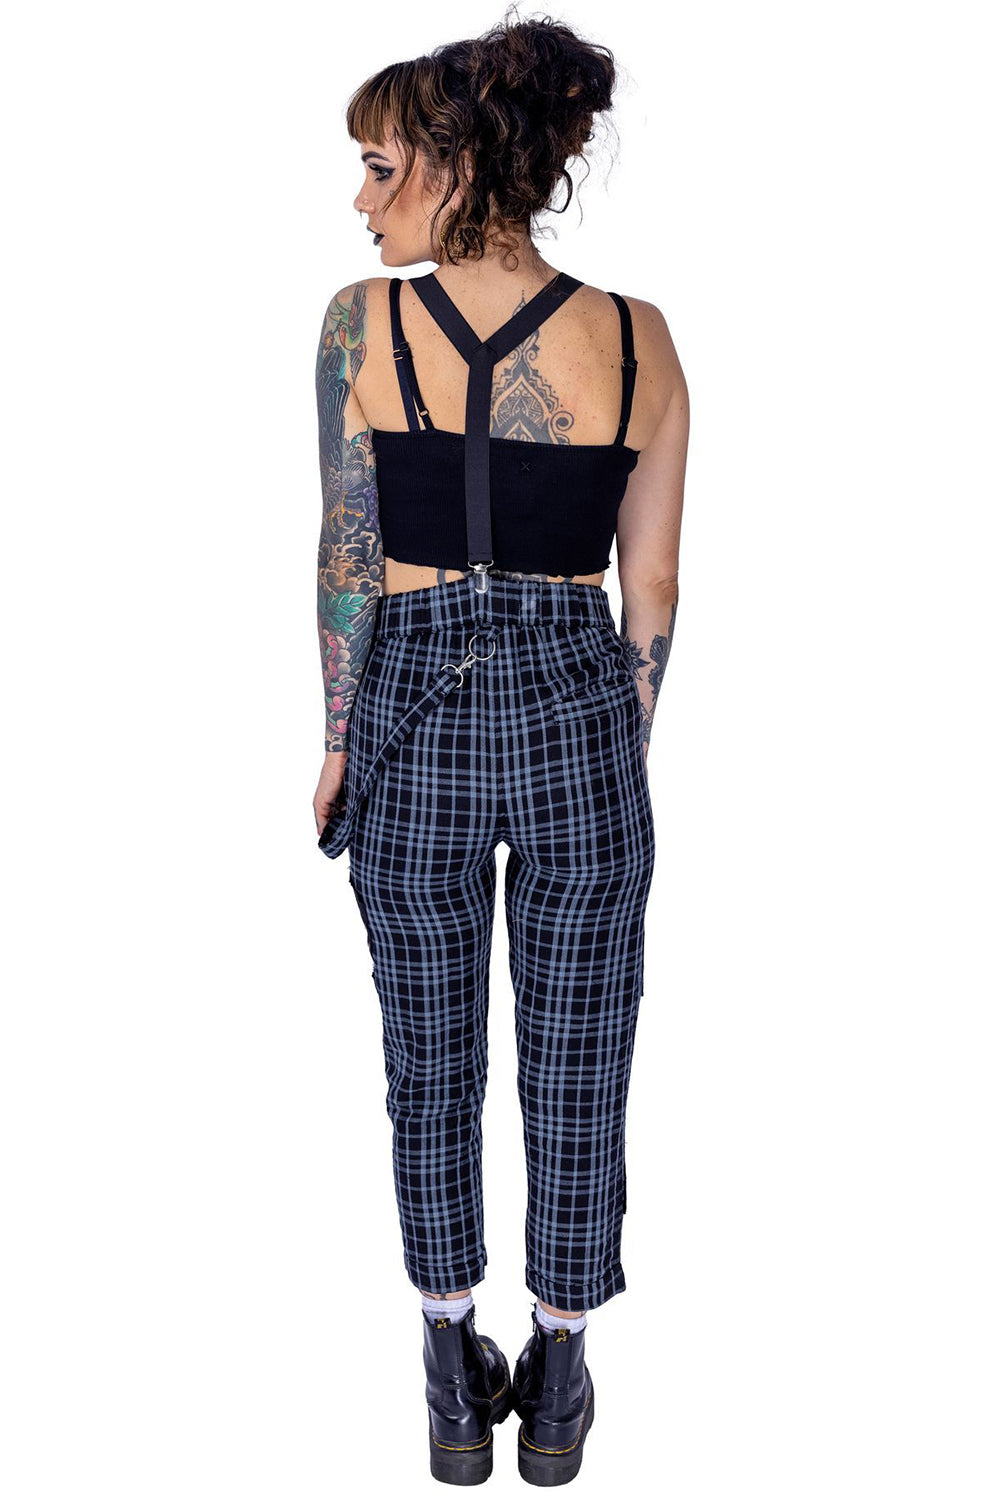 Grimoire Dungarees [Grey]